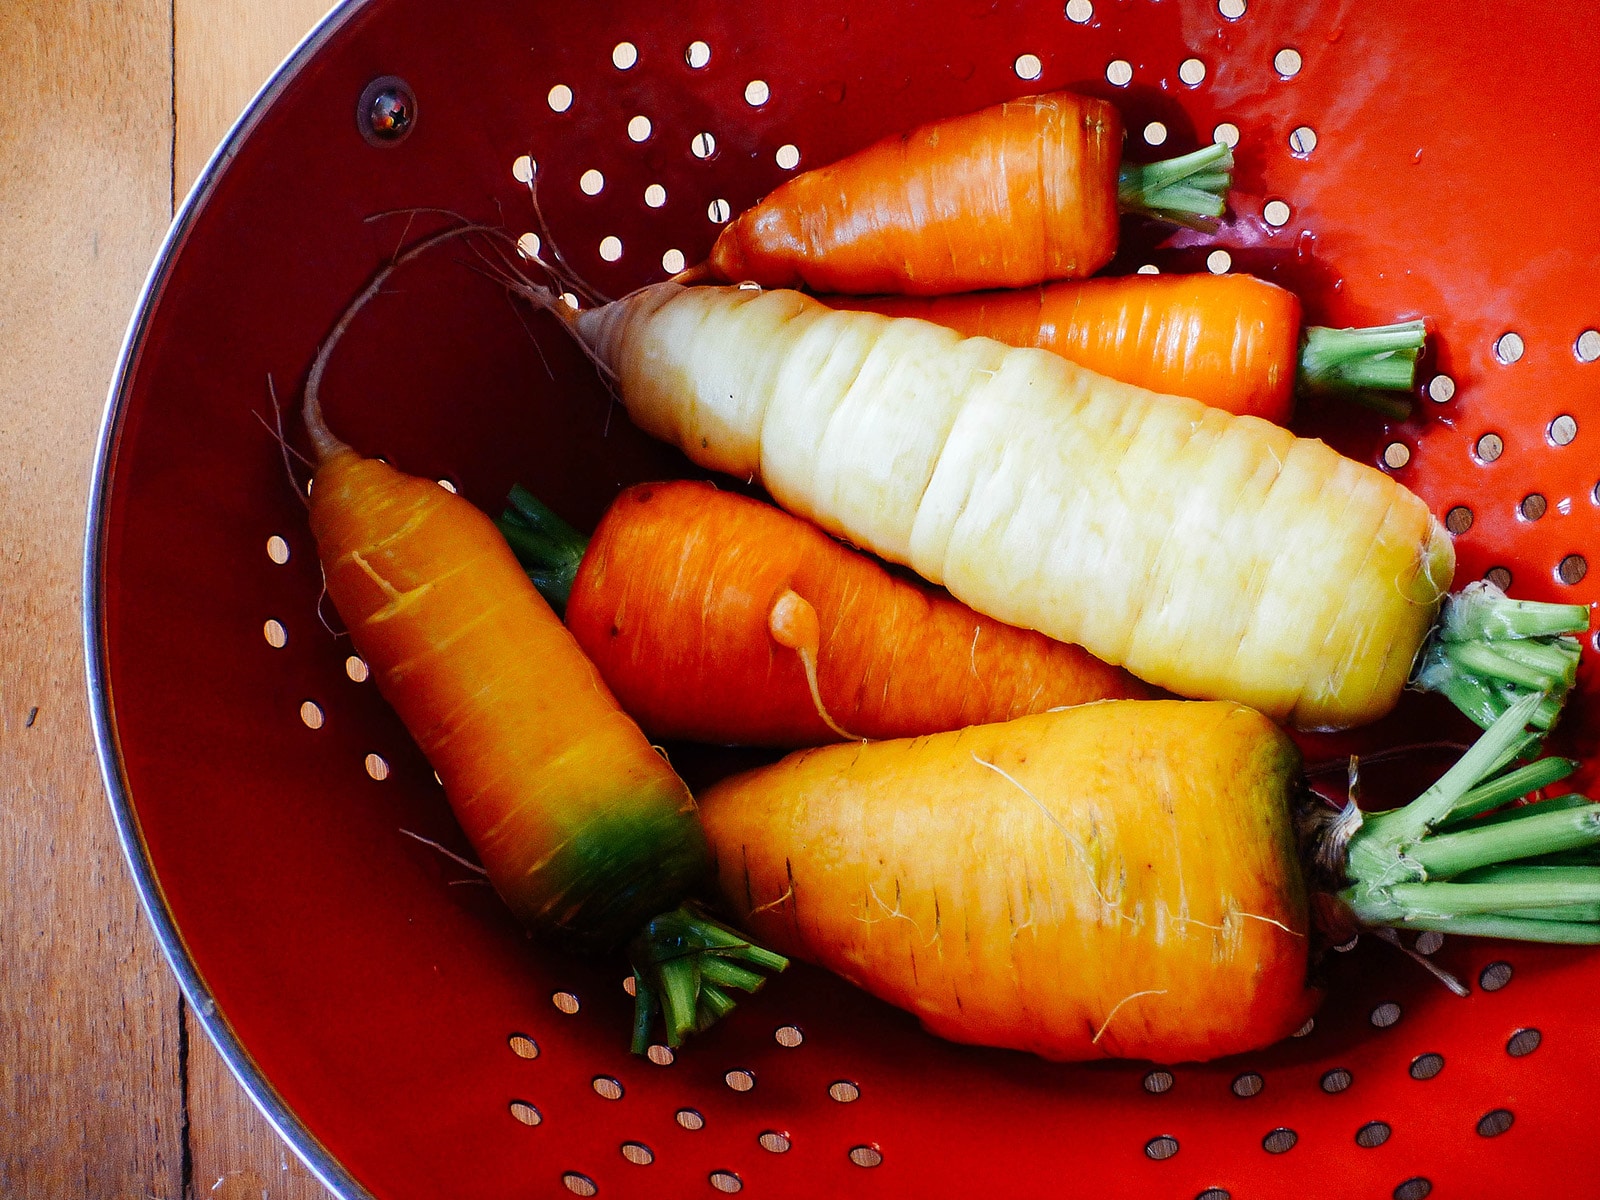 Colander full of orange, yellow, and white carrots